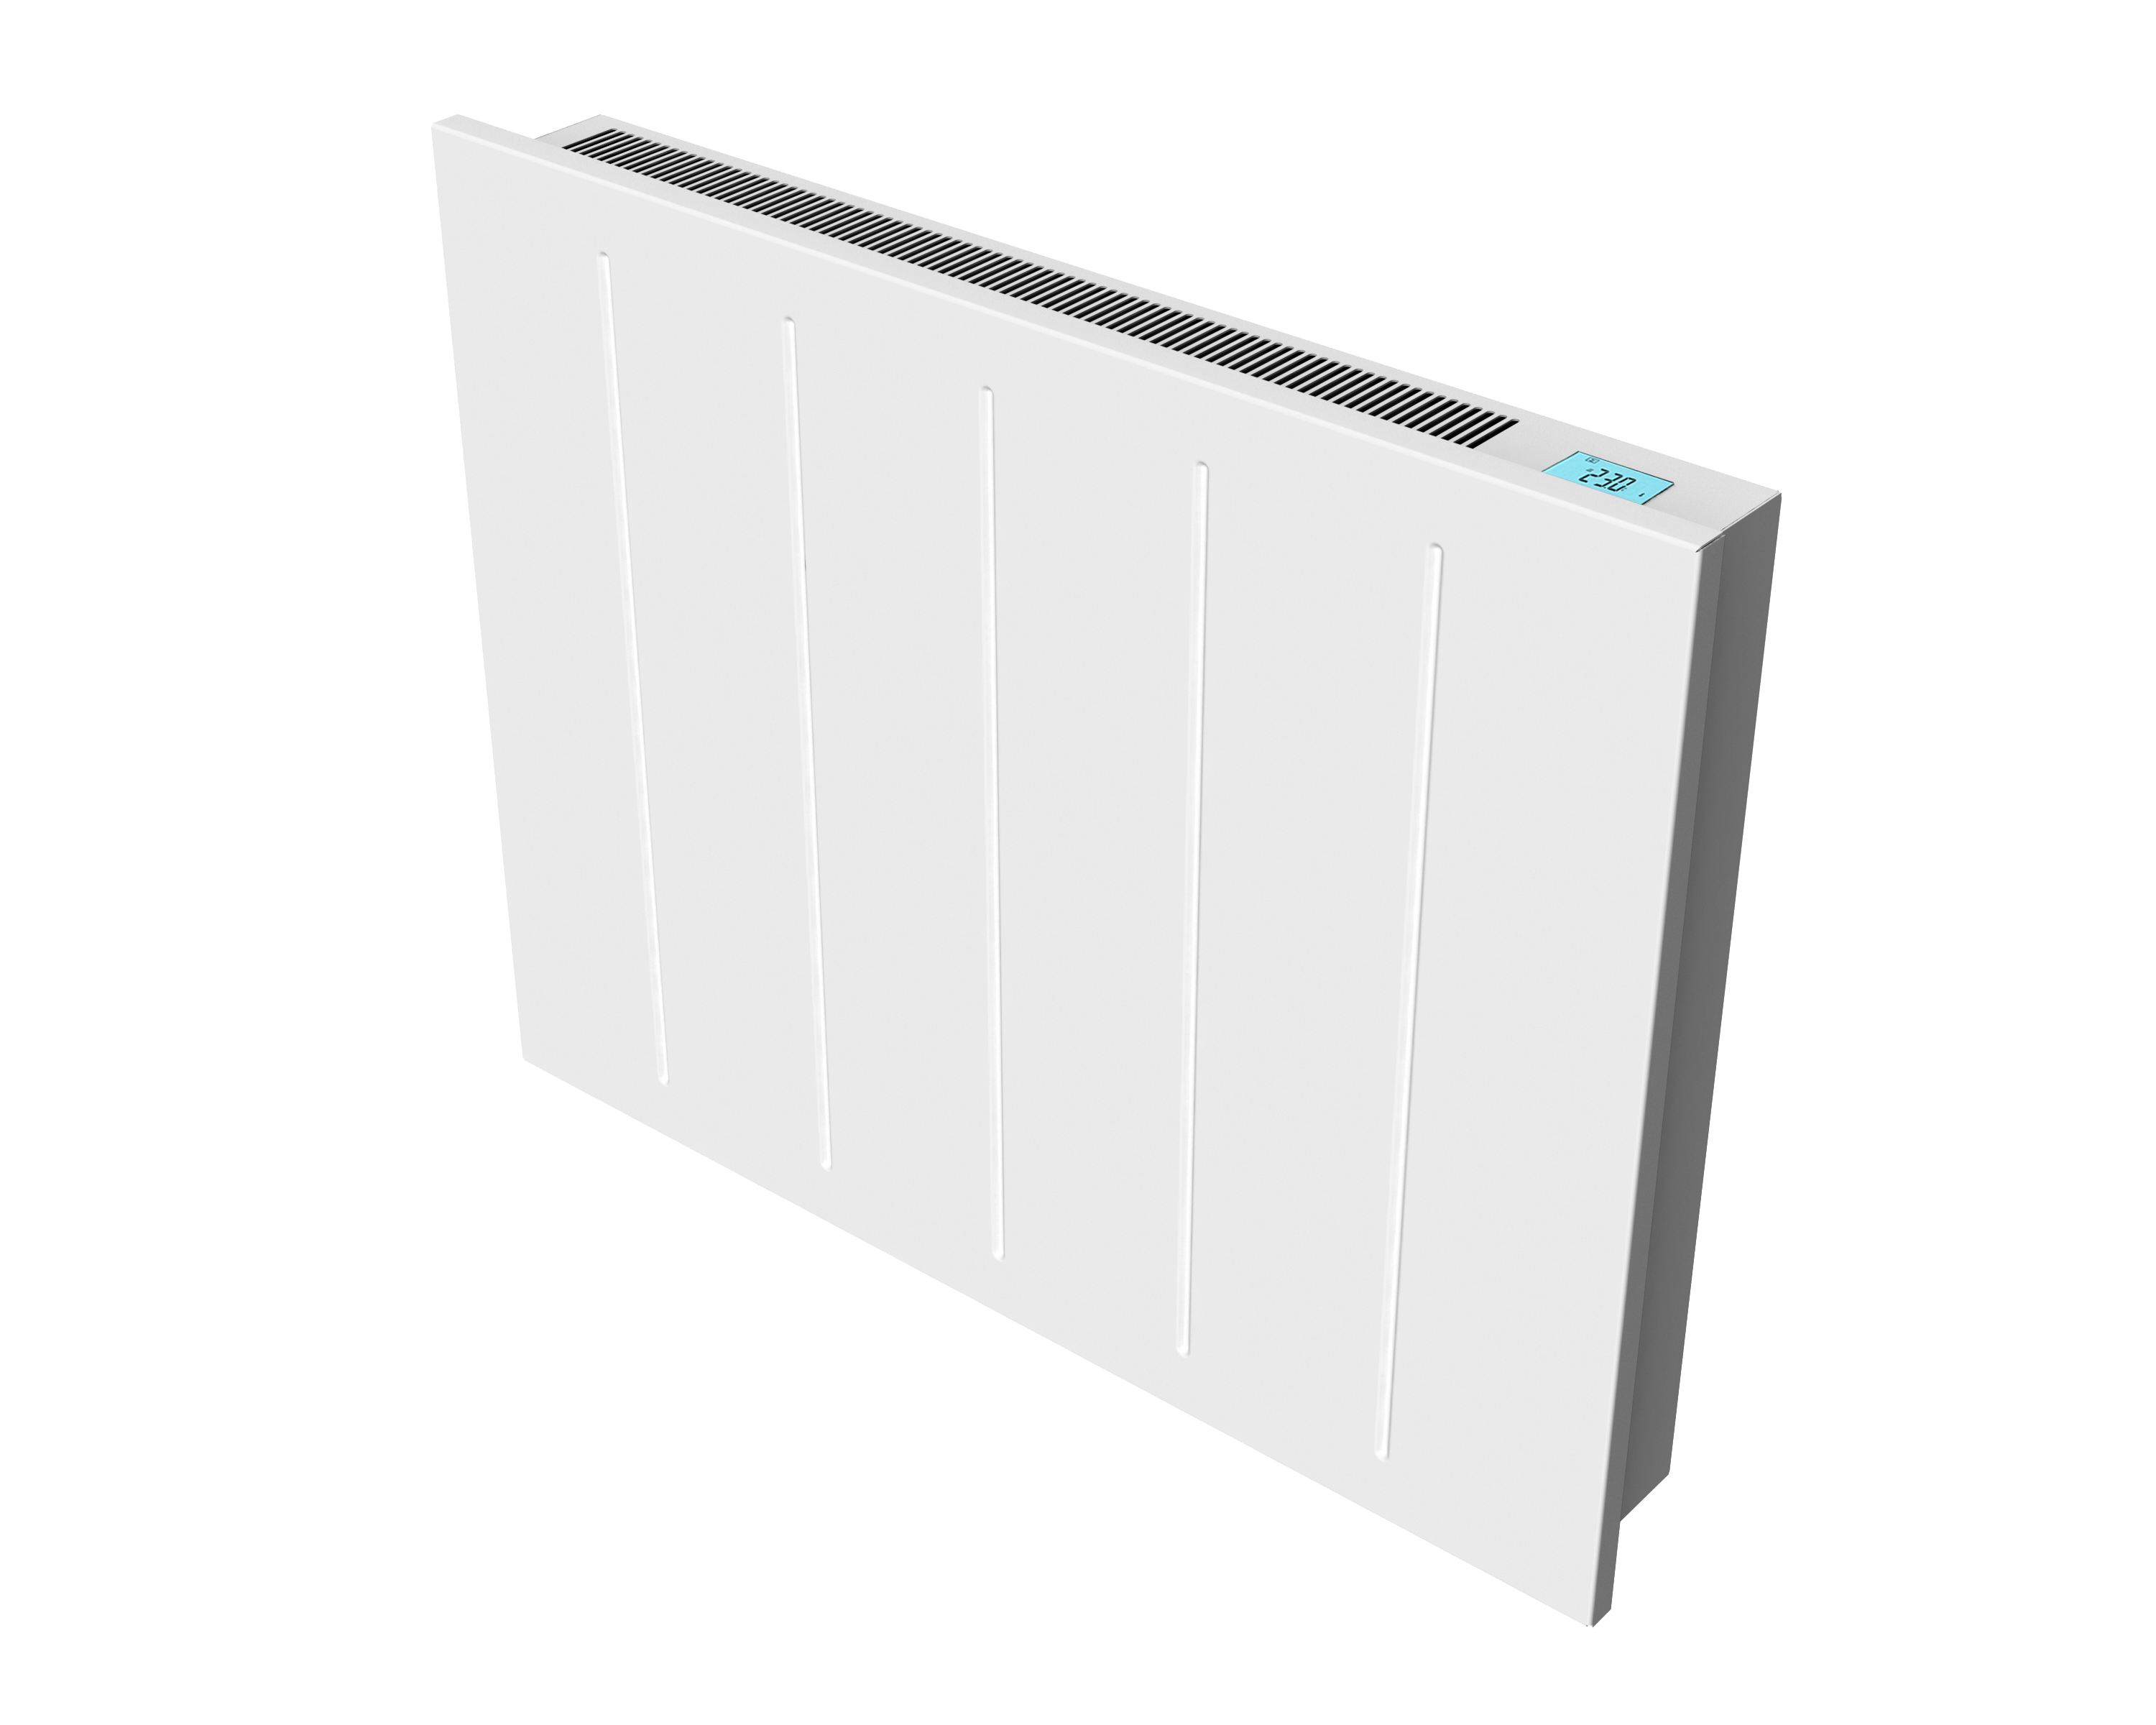 Electrorad introduces new smart panel heaters